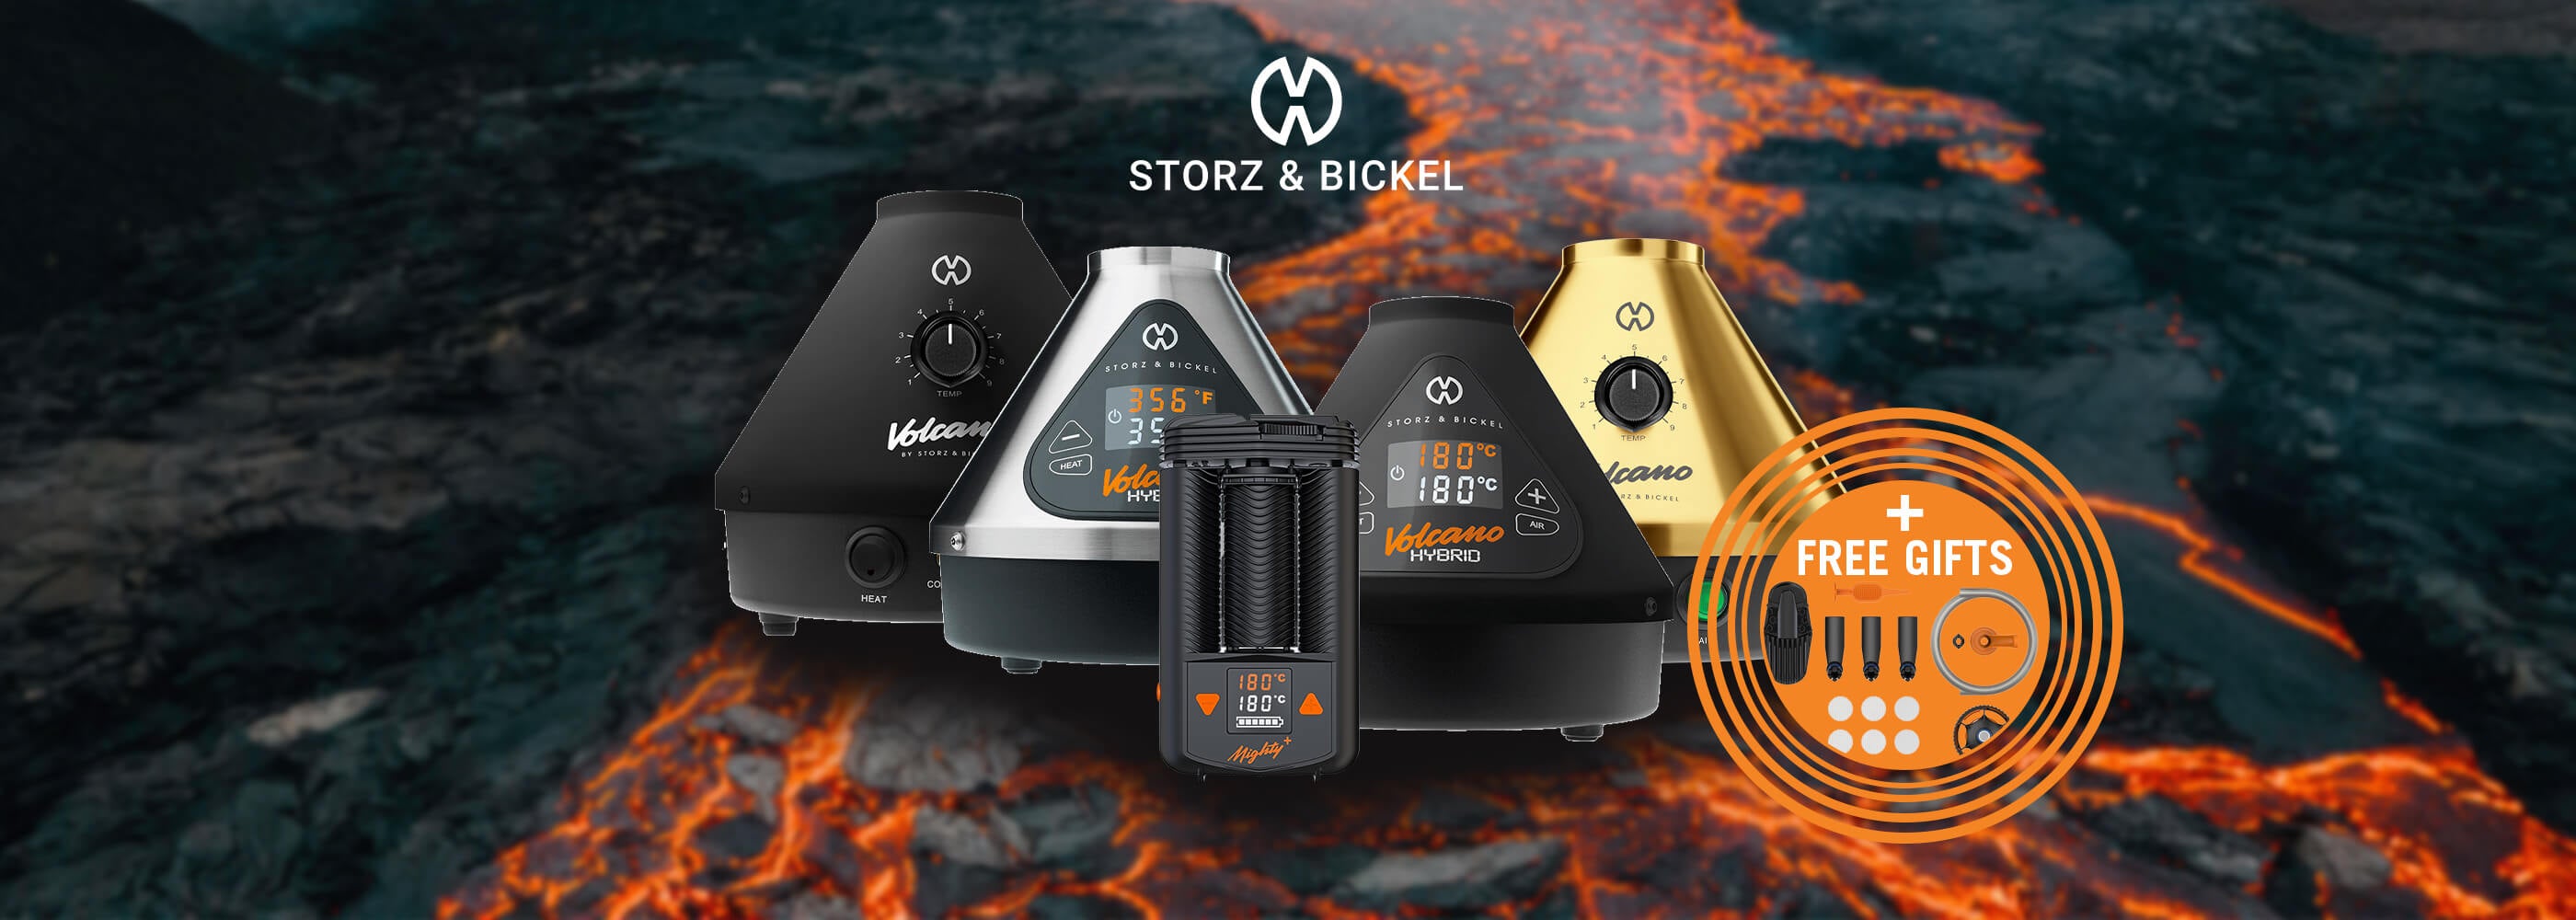 Vaposhop Storz & Bickel promotion free gift with all device